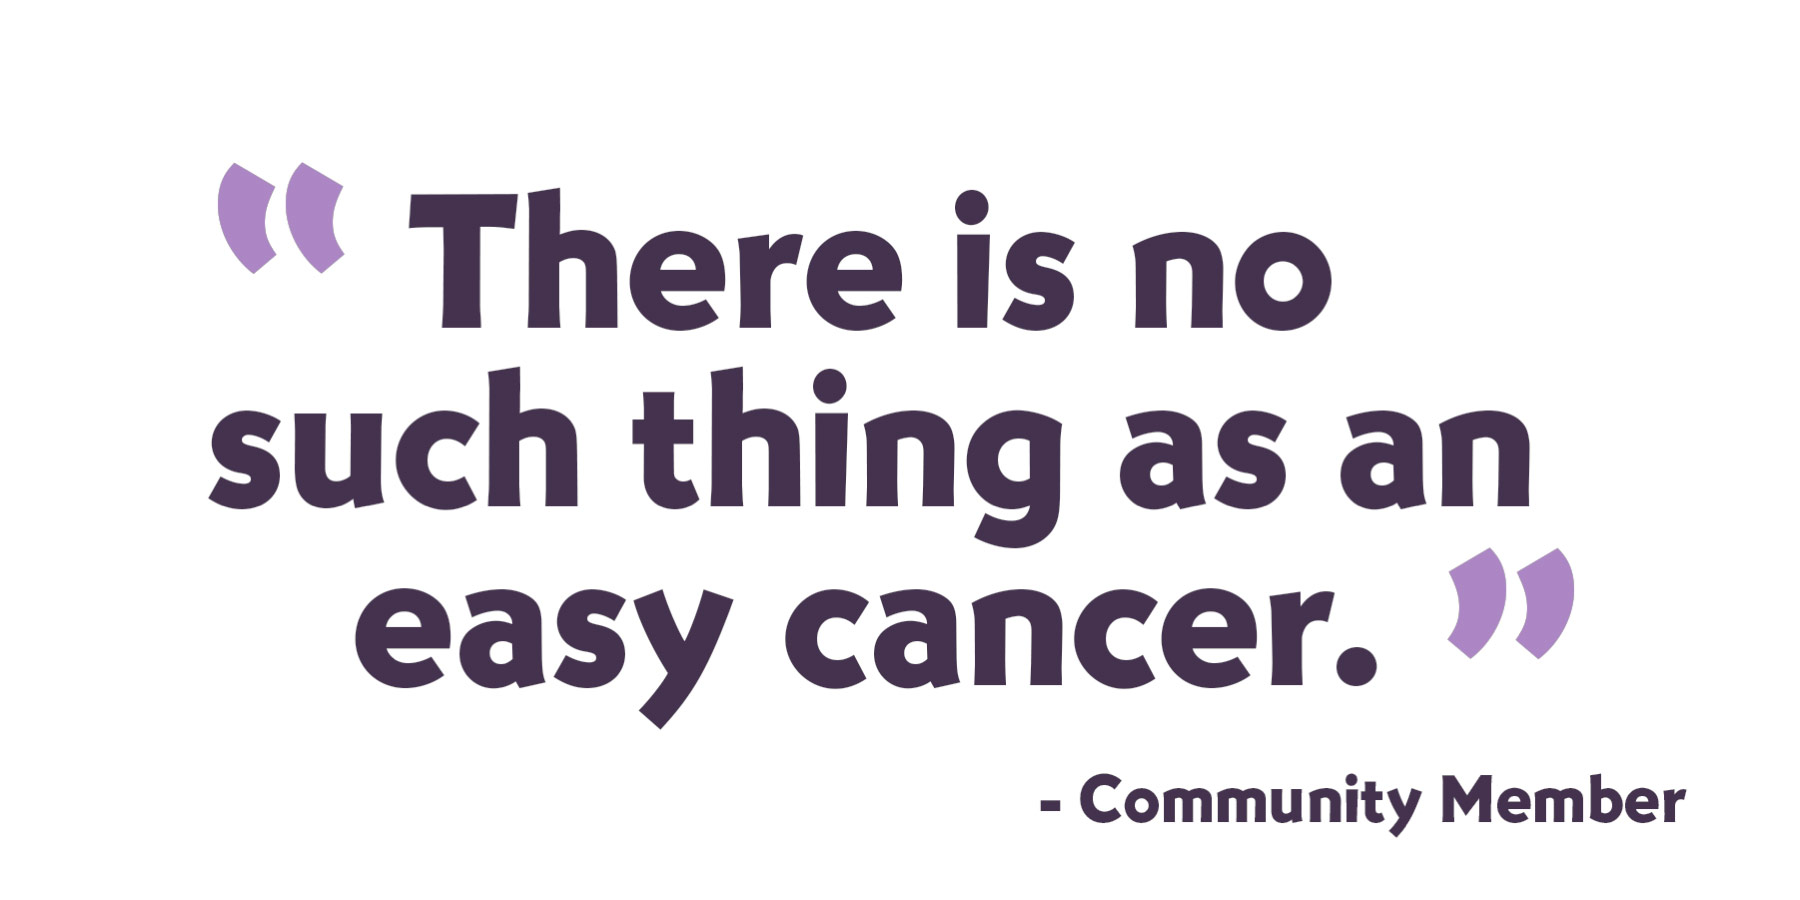 In article quote 3: "There is no such thing as an easy cancer."